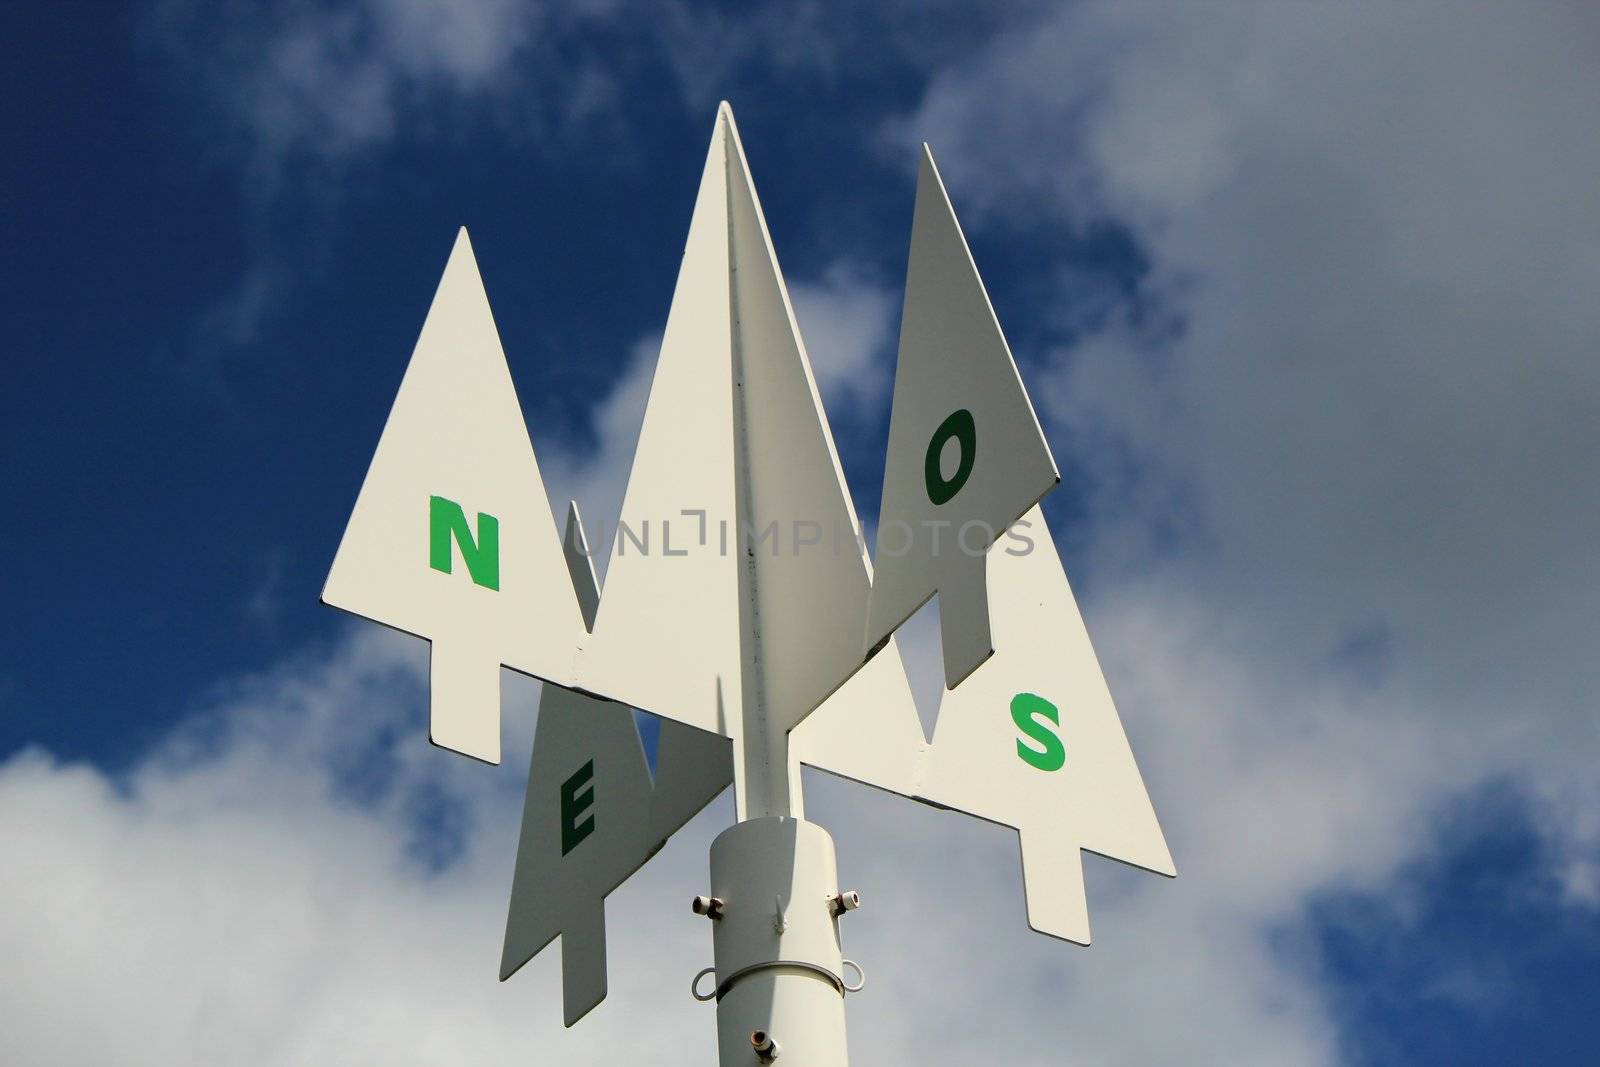 Direction signpost showing the compass points North,South,West and East against a cloudy blue sky.